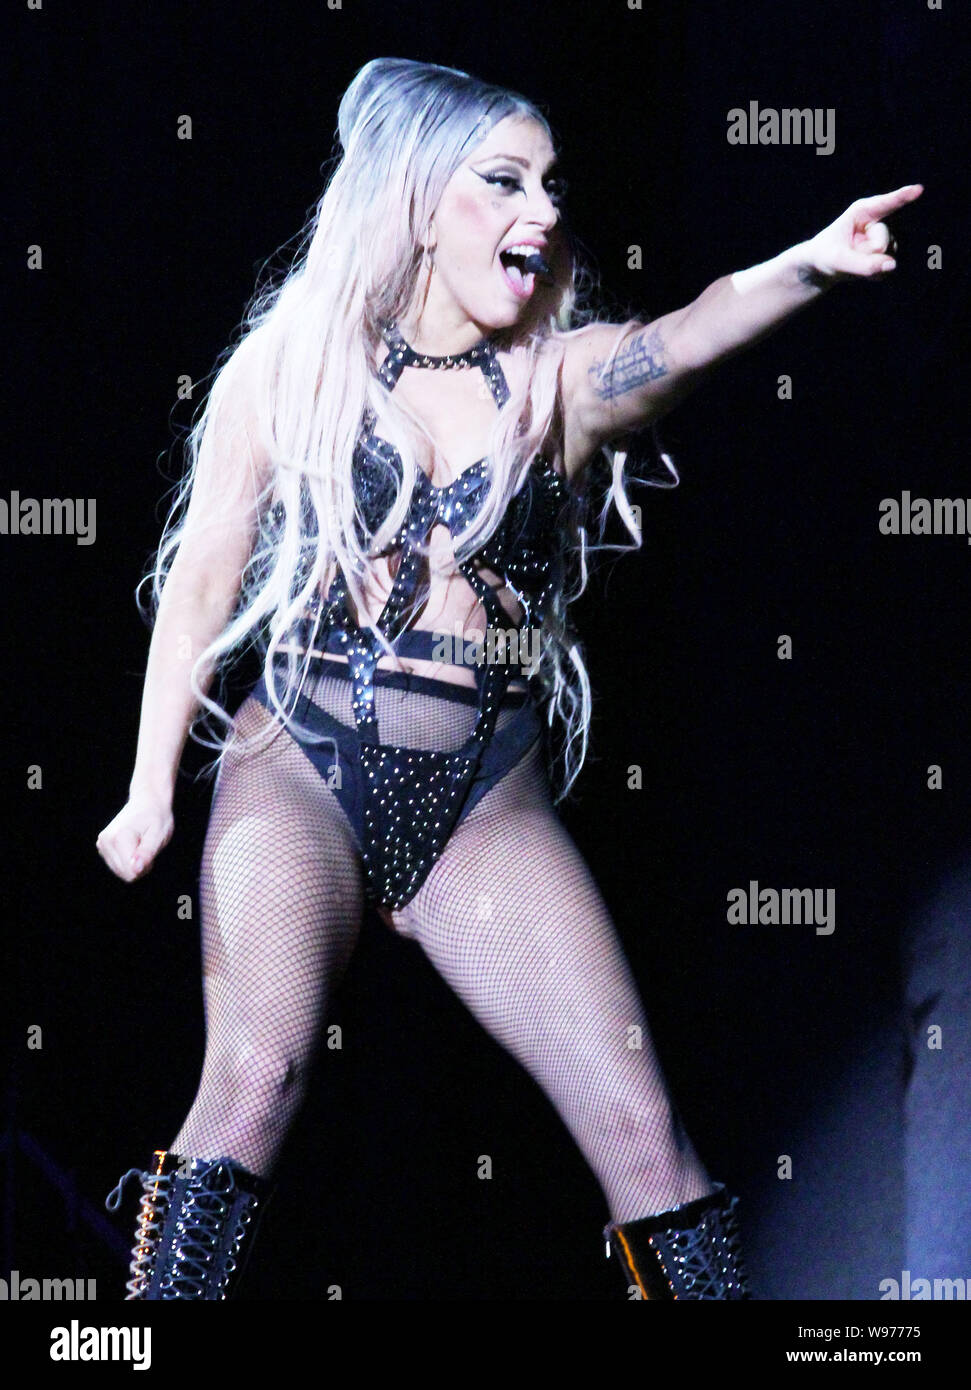 Us Pop Star Lady Gaga Performs During Her Born This Way Ball Asia Tour Concert In Taipei Taiwan 18 May 12 Lady Gaga Fired Up The Audience At He Stock Photo Alamy